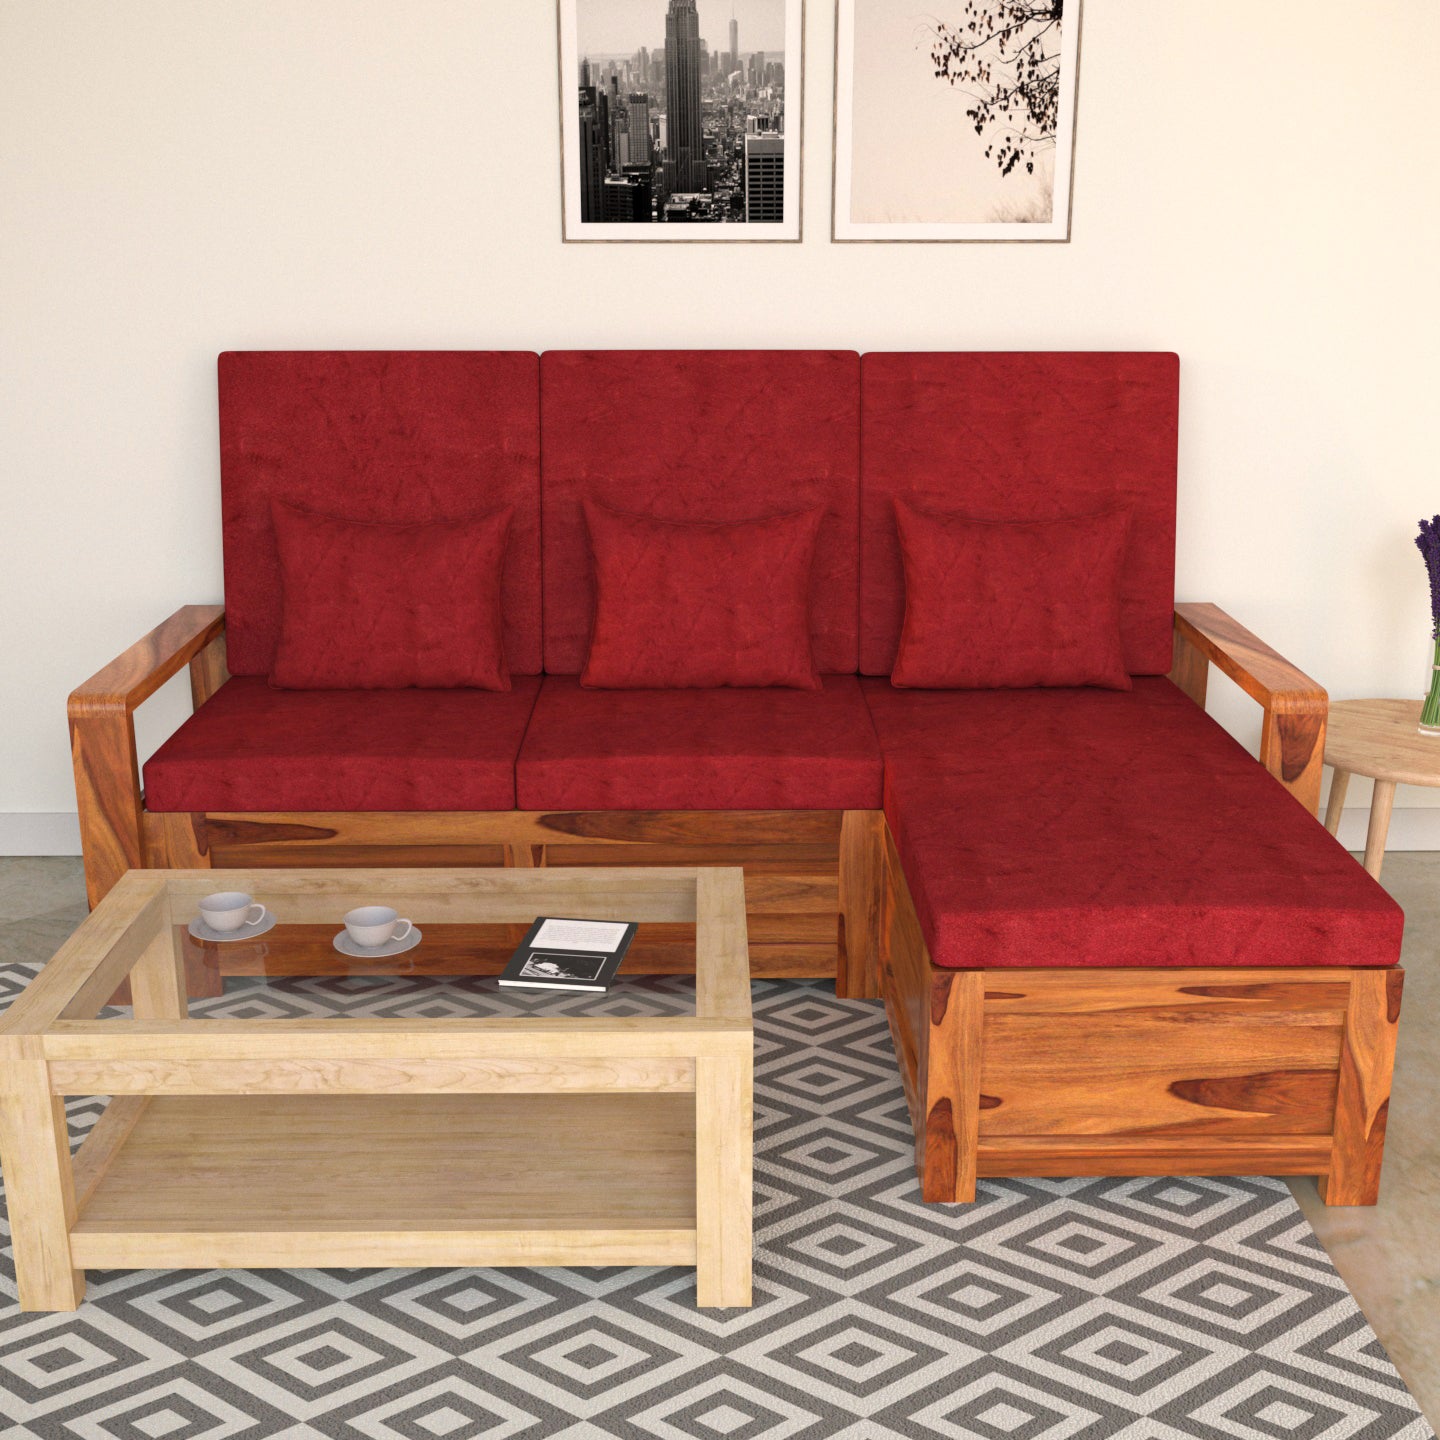 Royal Red Wooden Premium 3 Seater Sofa with Bed Storage Sofa